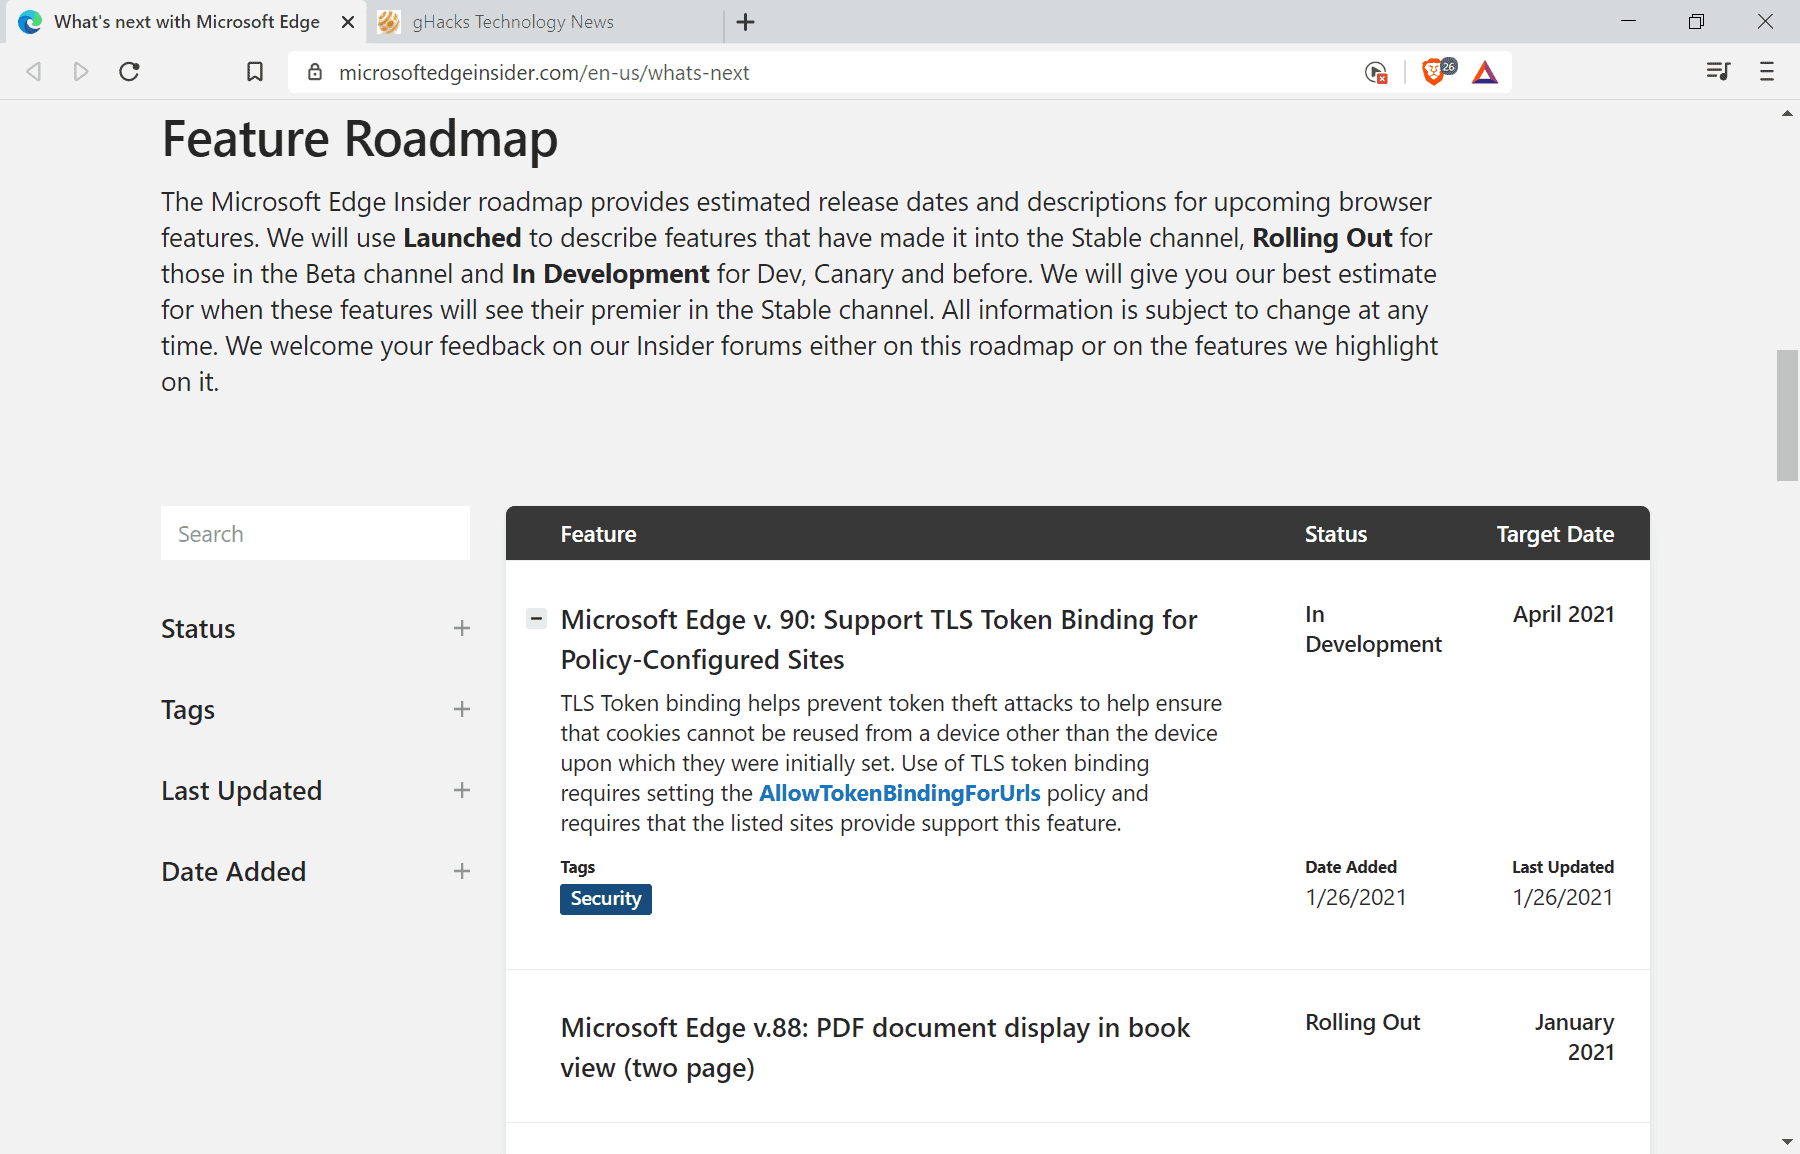 Want to know what is coming up for Microsoft Edge? A roadmap has you covered